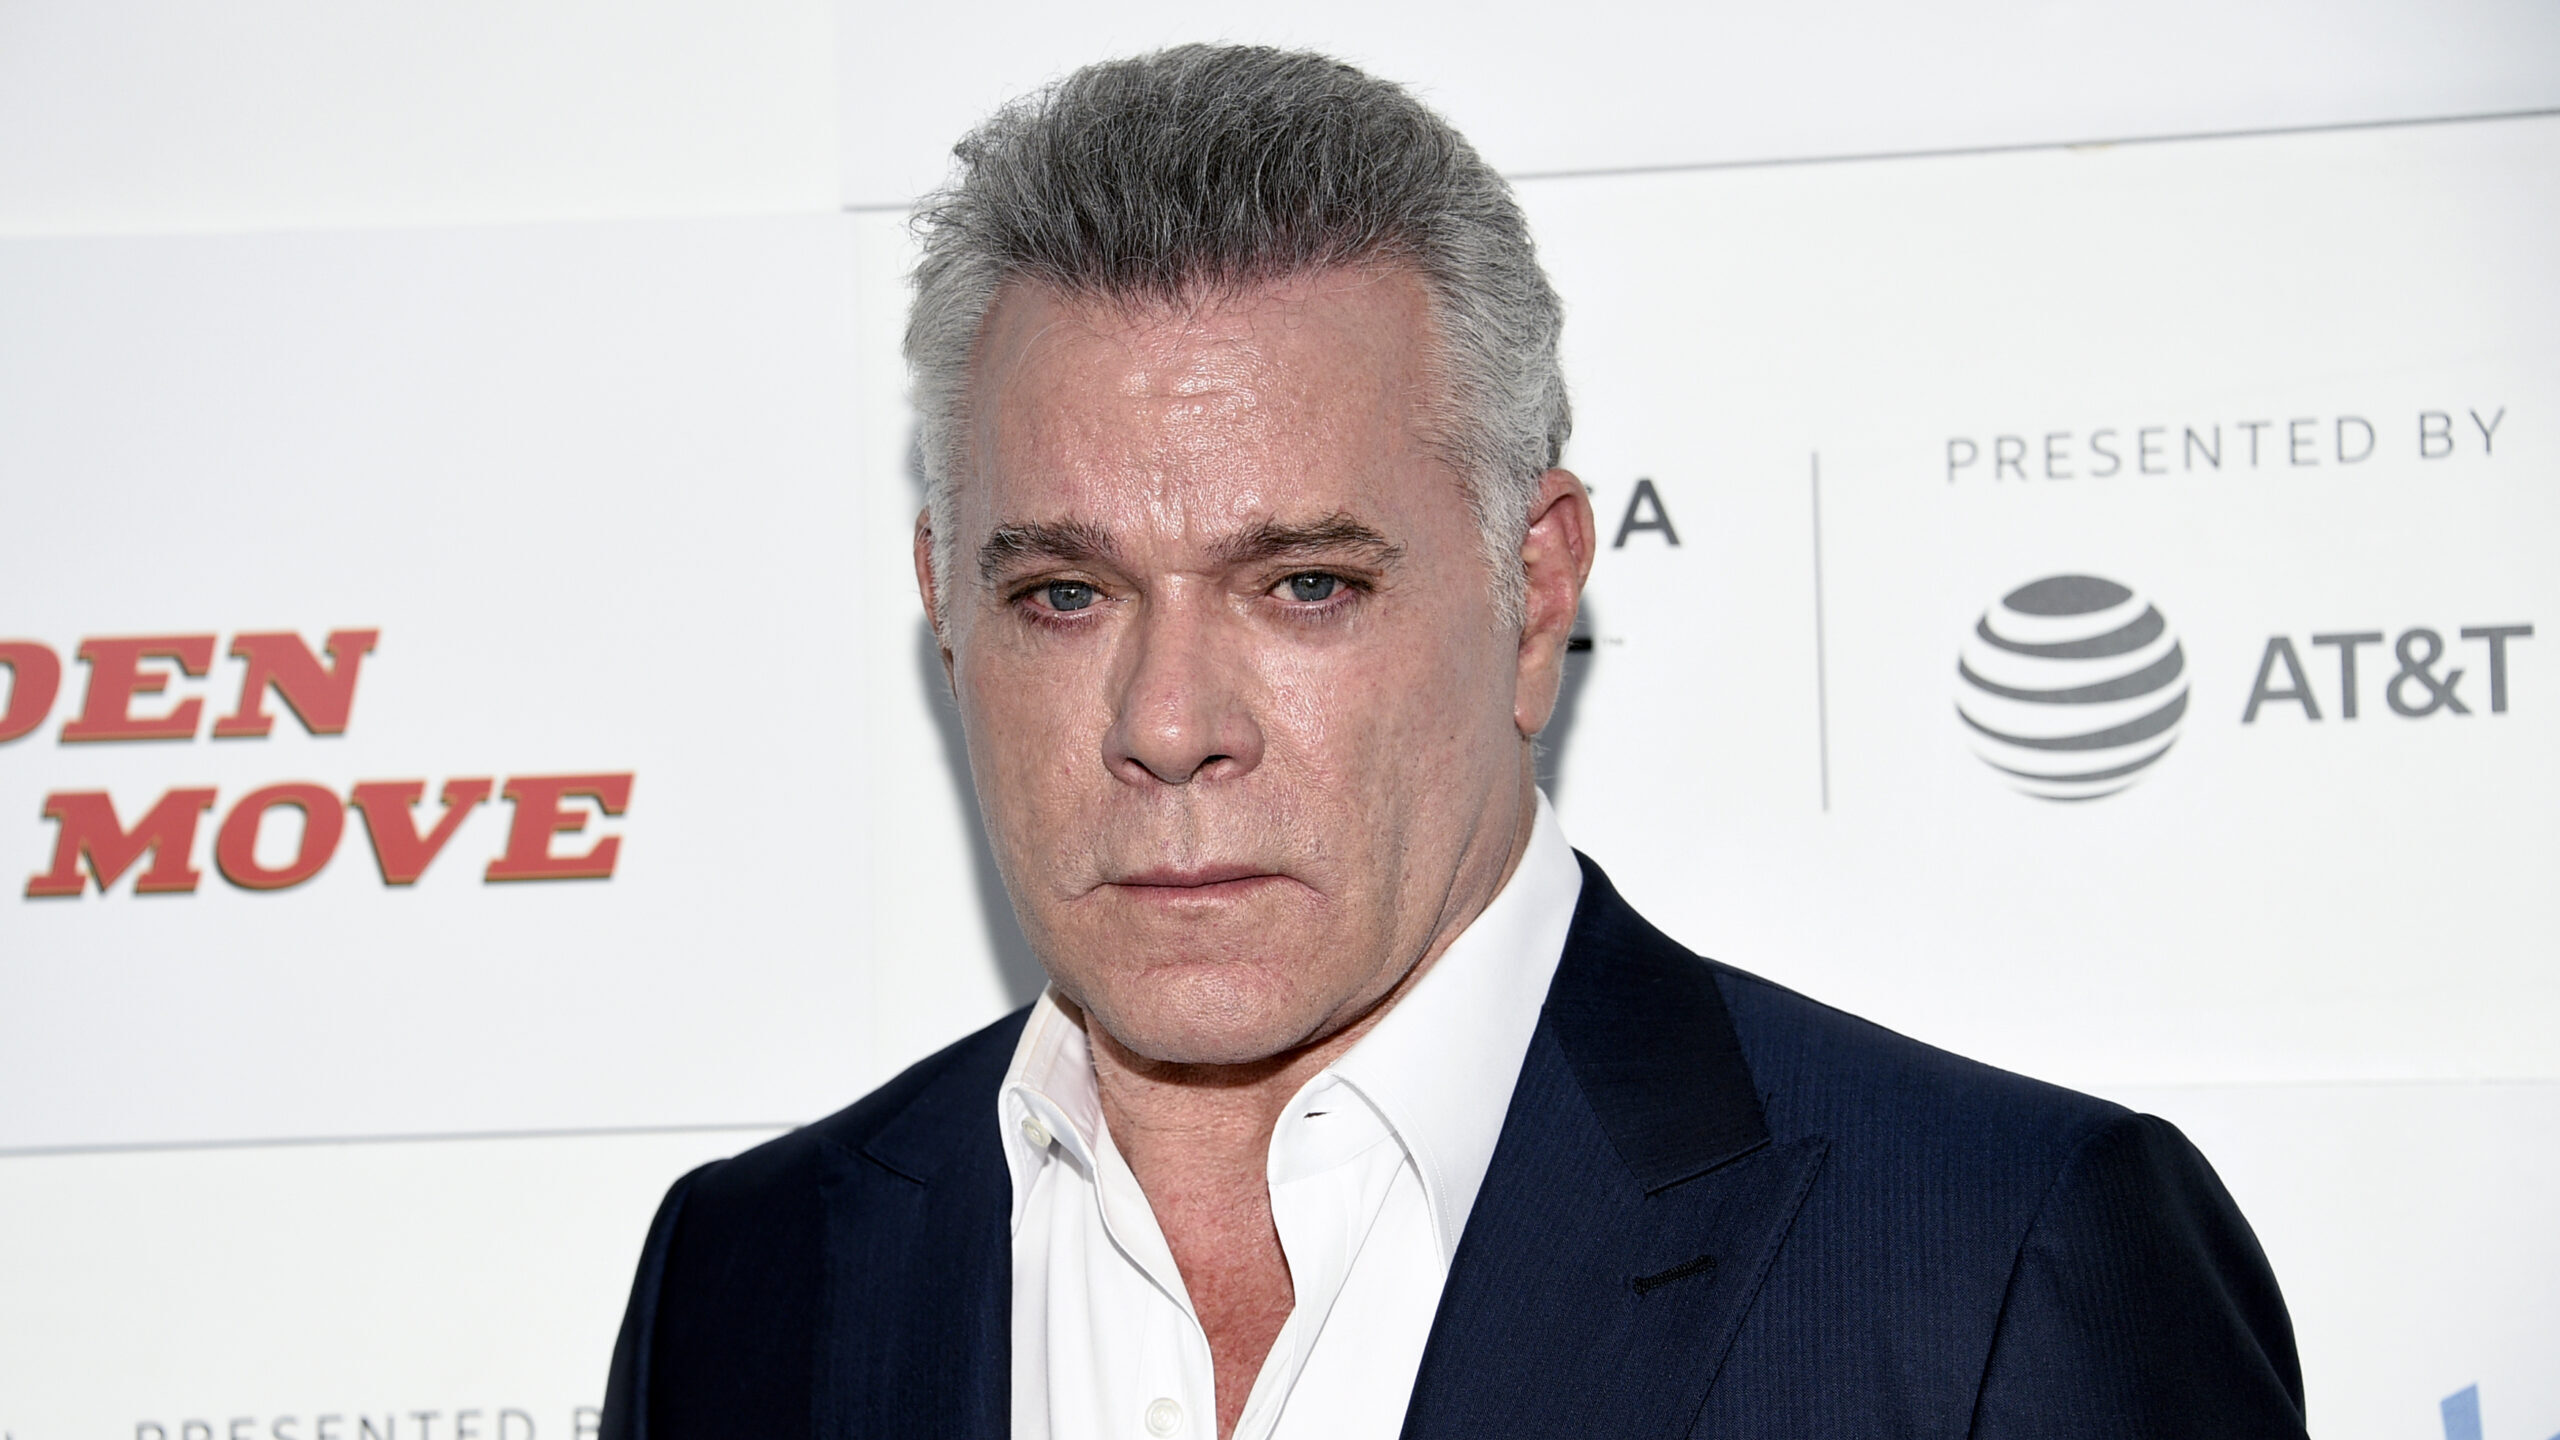 FILE - Actor Ray Liotta attends the "No Sudden Move" premiere during the 20th Tribeca Festival in New York on June 18, 2021. Liotta, the actor best known for playing mobster Henry Hill in “Goodfellas” and baseball player Shoeless Joe Jackson in “Field of Dreams,” has died. He was 67. A representative for Liotta told The Hollywood Reporter and NBC News that he died in his sleep Wednesday night in the Dominican Republic, where he was filming a new movie. (Photo by Evan Agostini/Invision/AP, File)